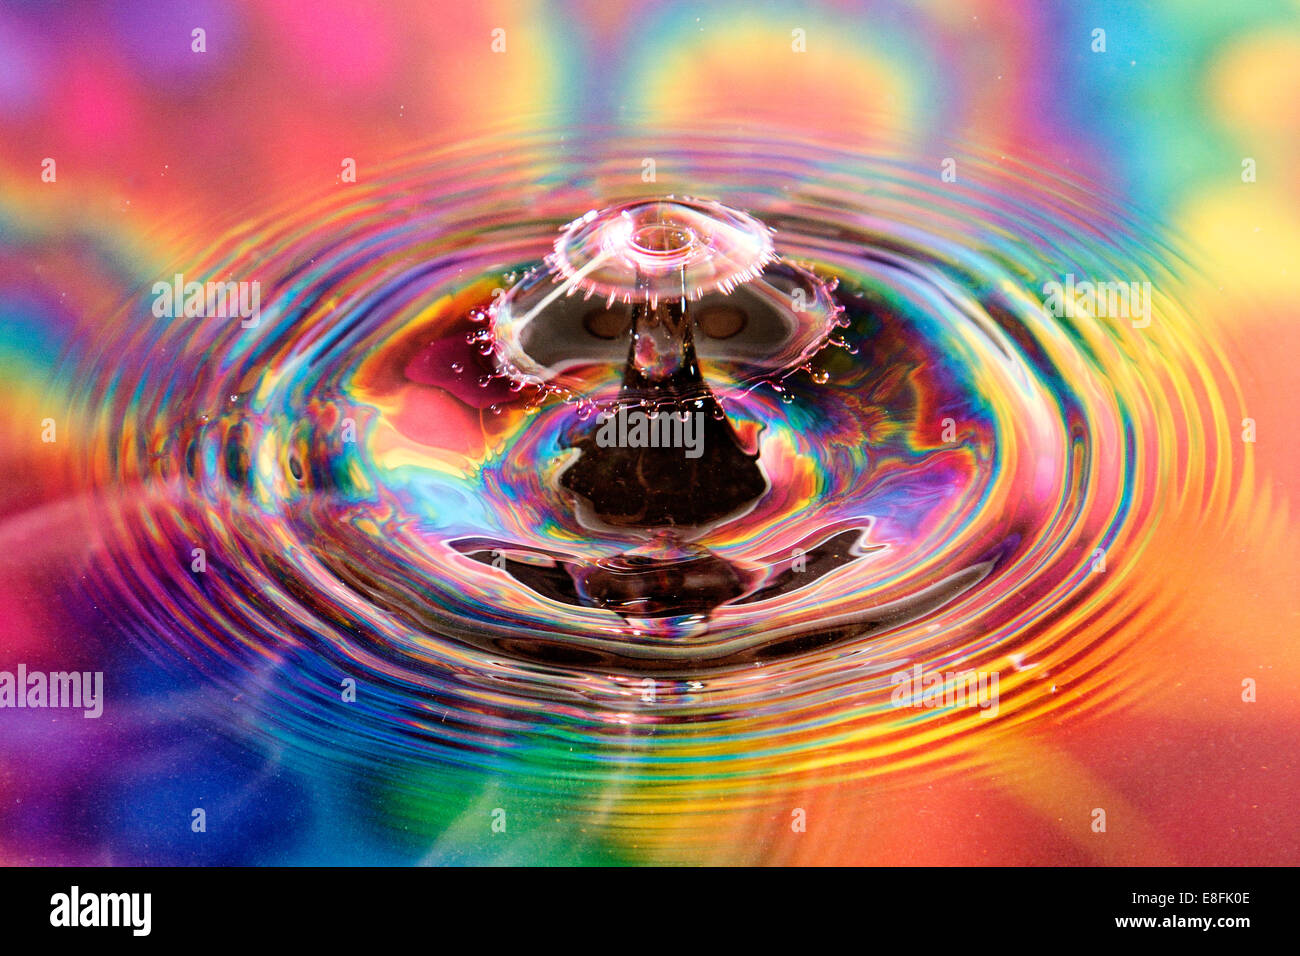 Water drop with colorful background Stock Photo